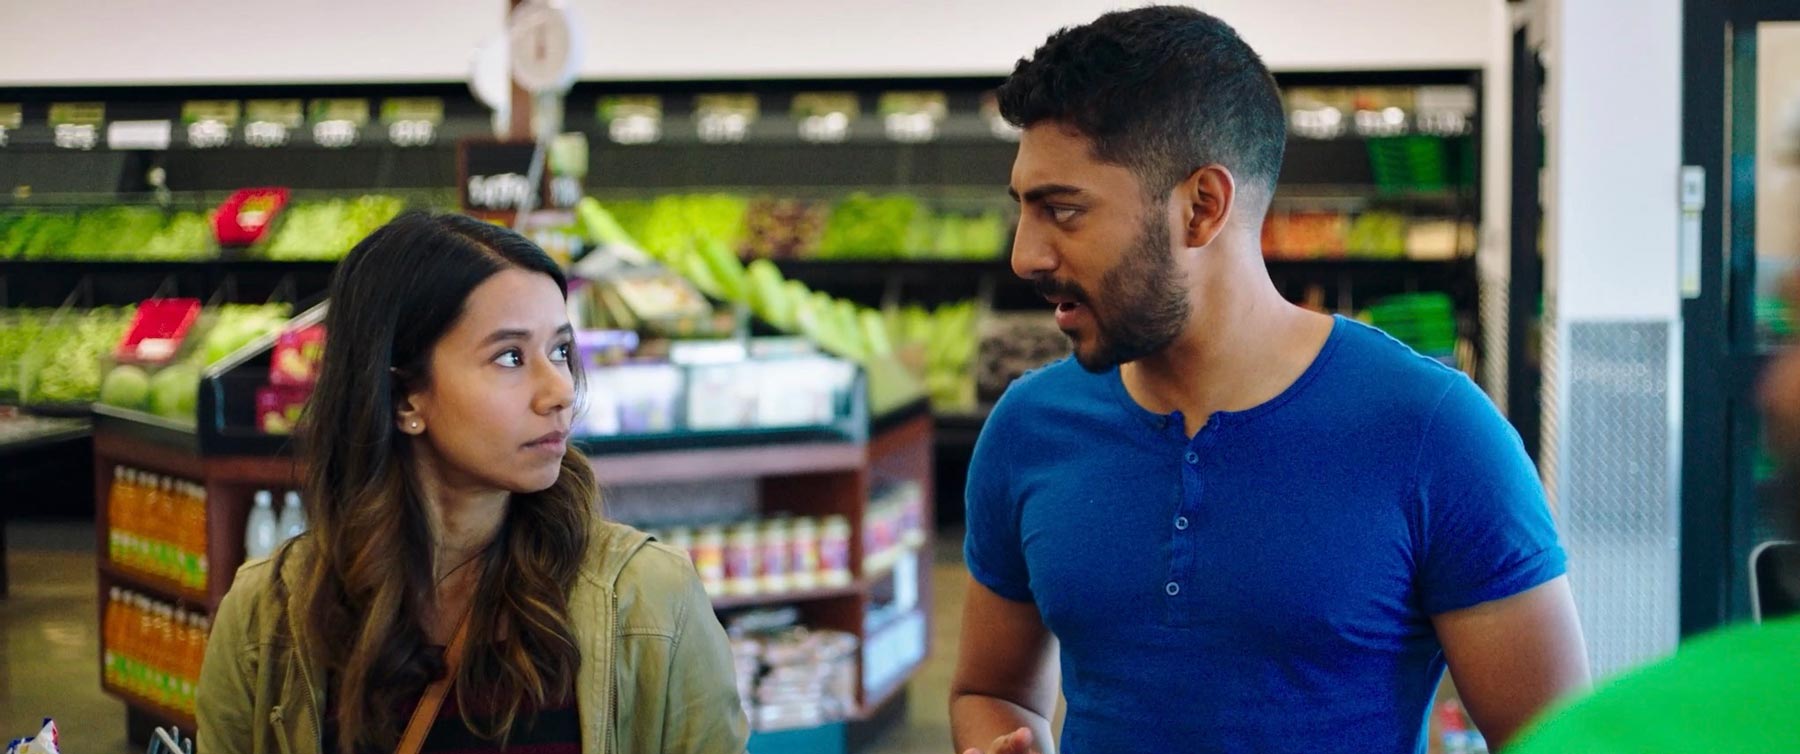 Definition Please film still: Young woman and man looking at each other as they speak in a grocery store